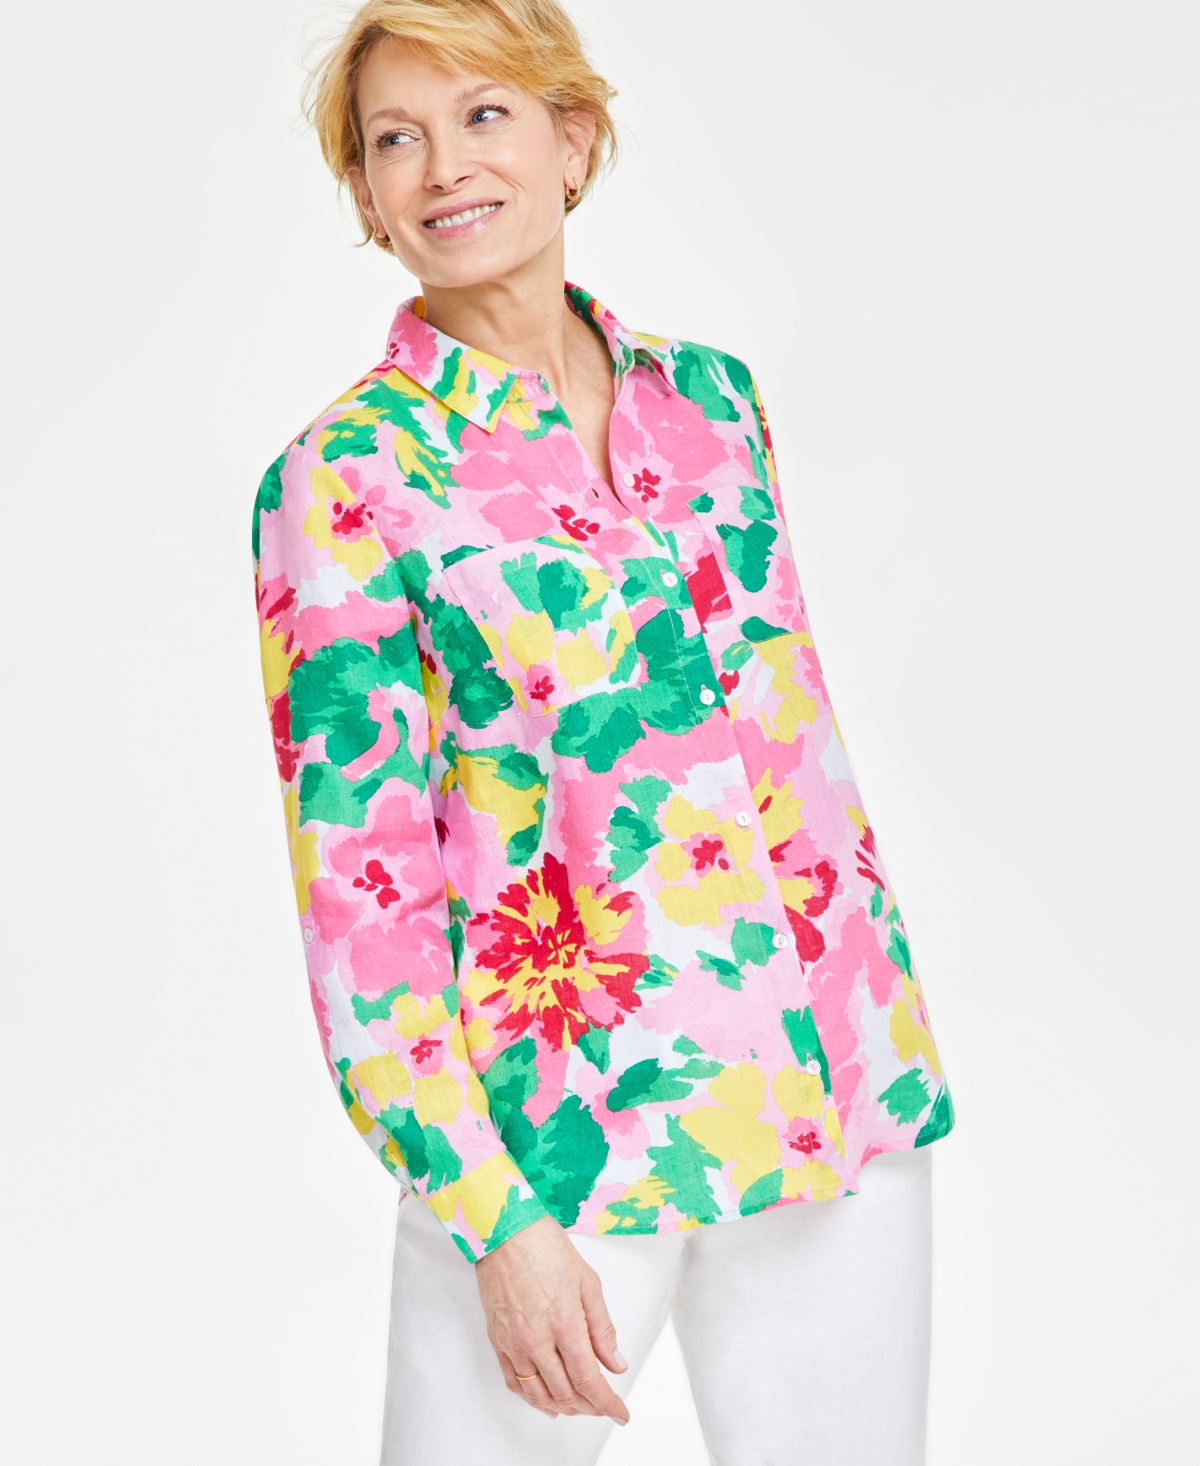 Petite 100% Linen Printed Button-Front Shirt, Created for Macy's - Bubble Bath Combo